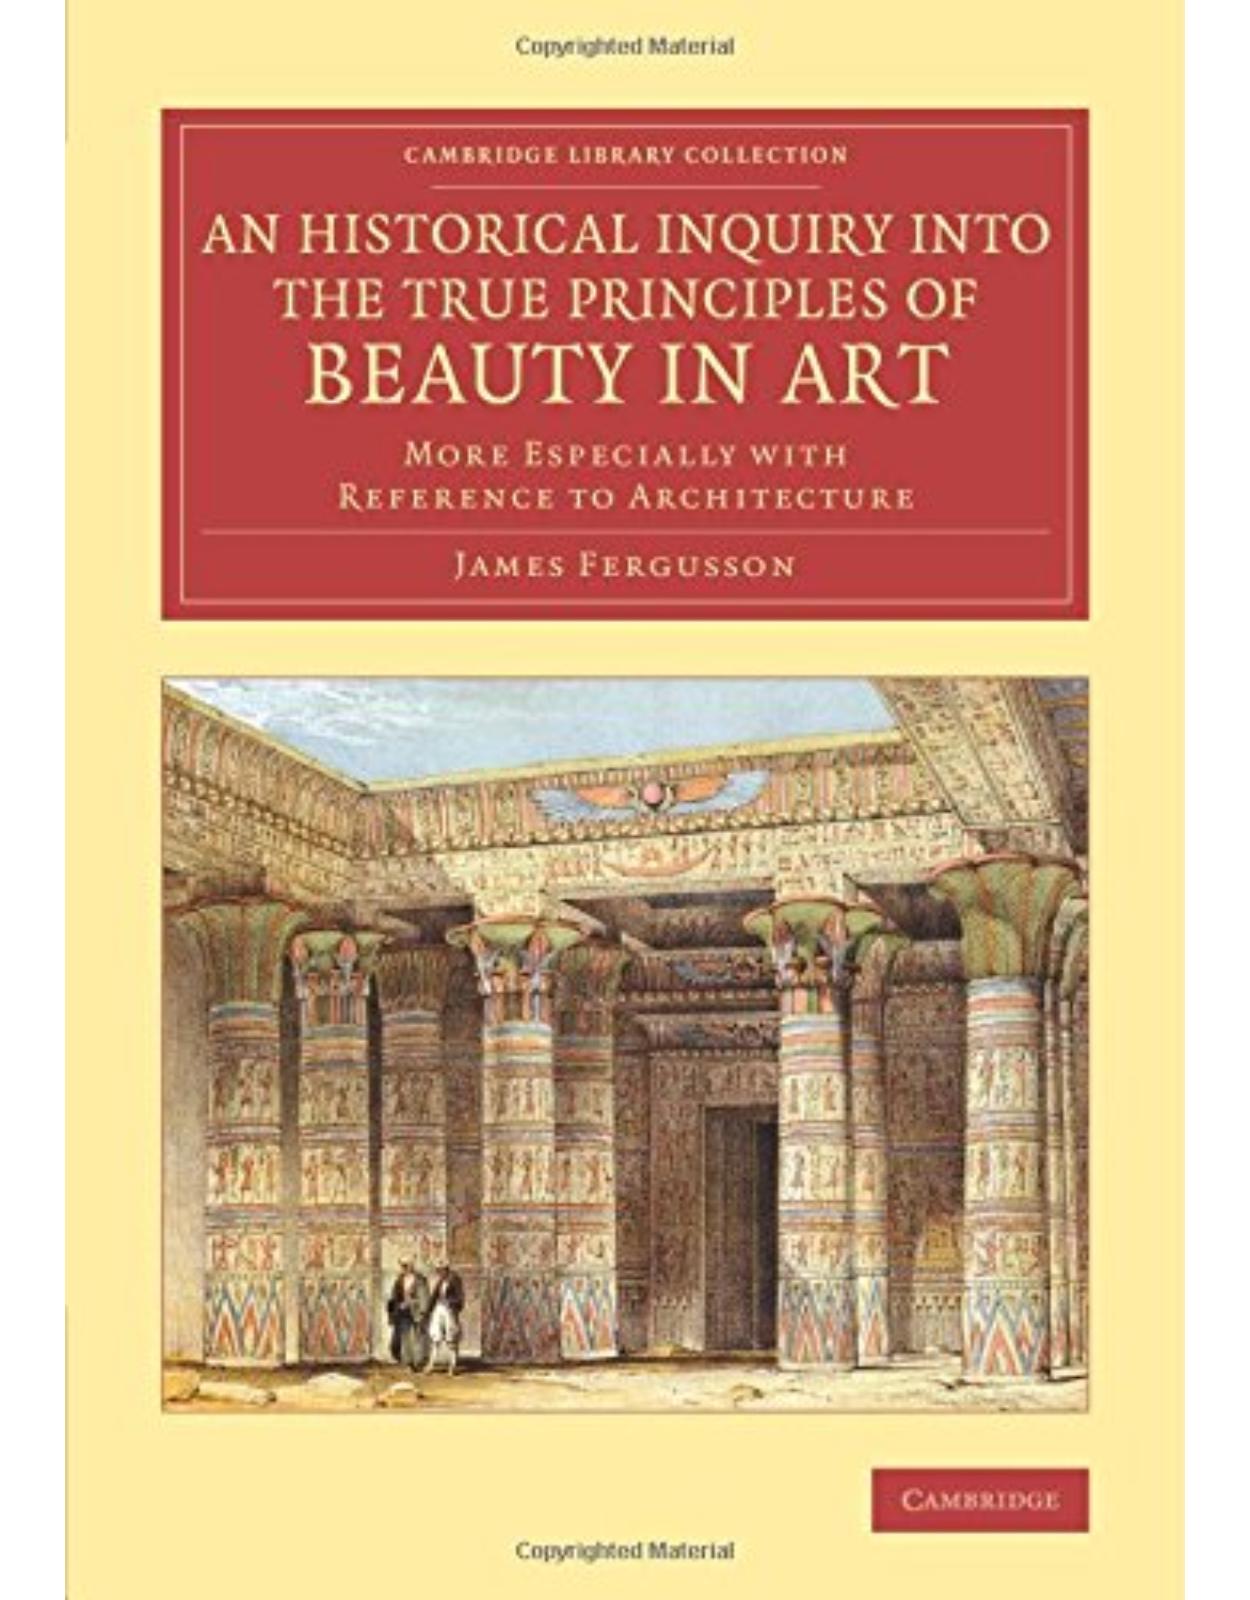 An Historical Inquiry into the True Principles of Beauty in Art: More Especially with Reference to Architecture (Cambridge Library Collection - Art and Architecture)